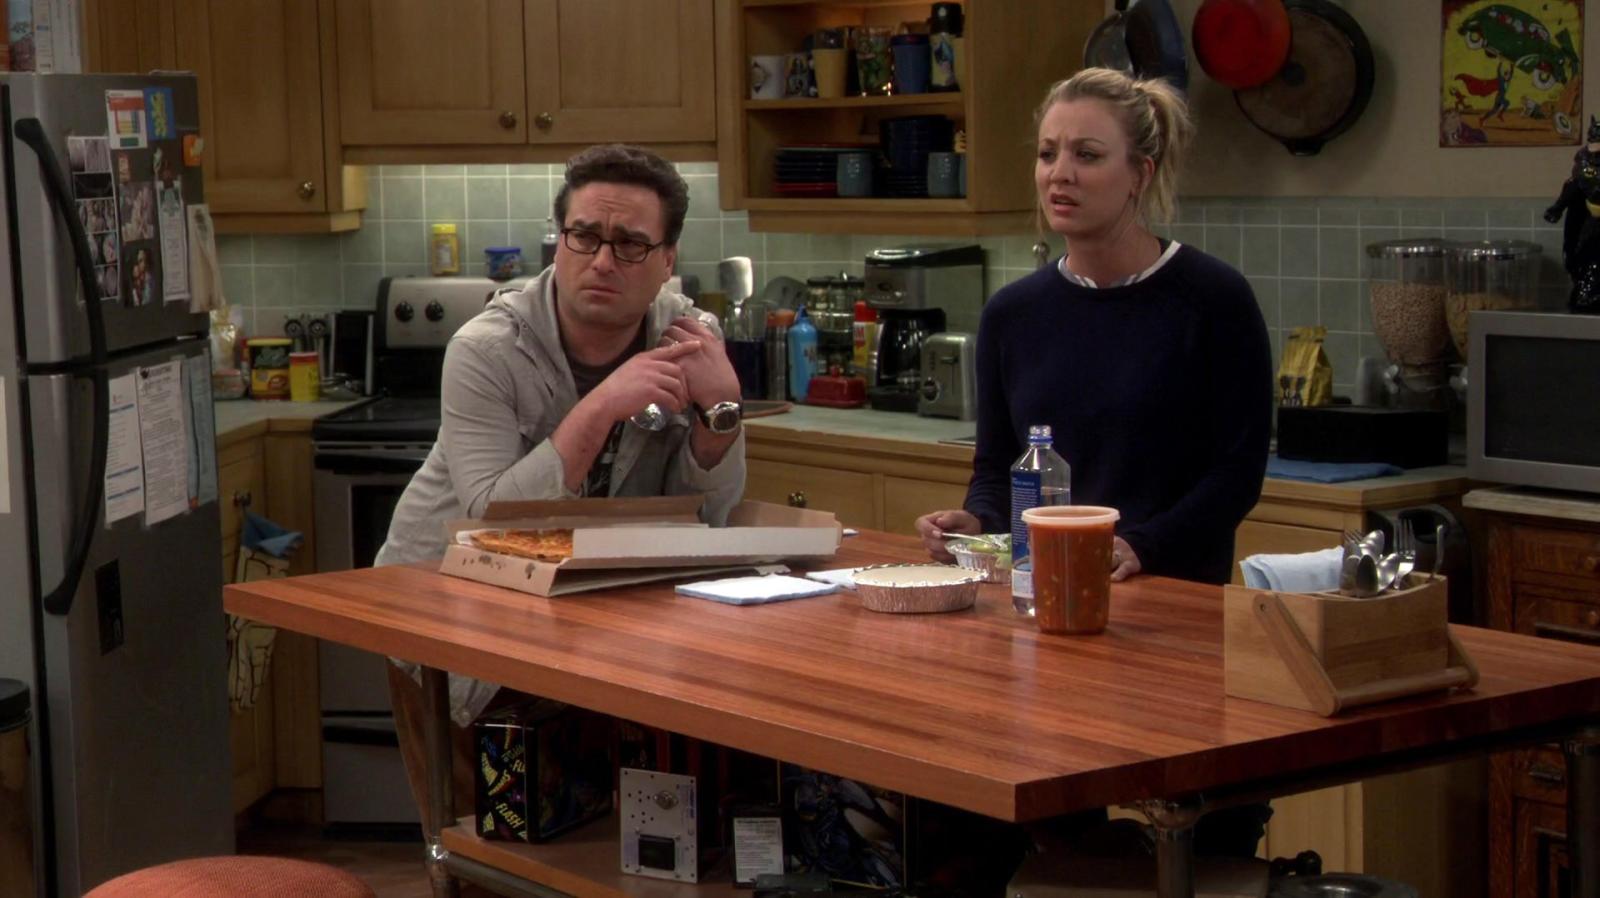 10 Big Bang Theory Relationships, Ranked from Toxic to #Soulmates - image 9